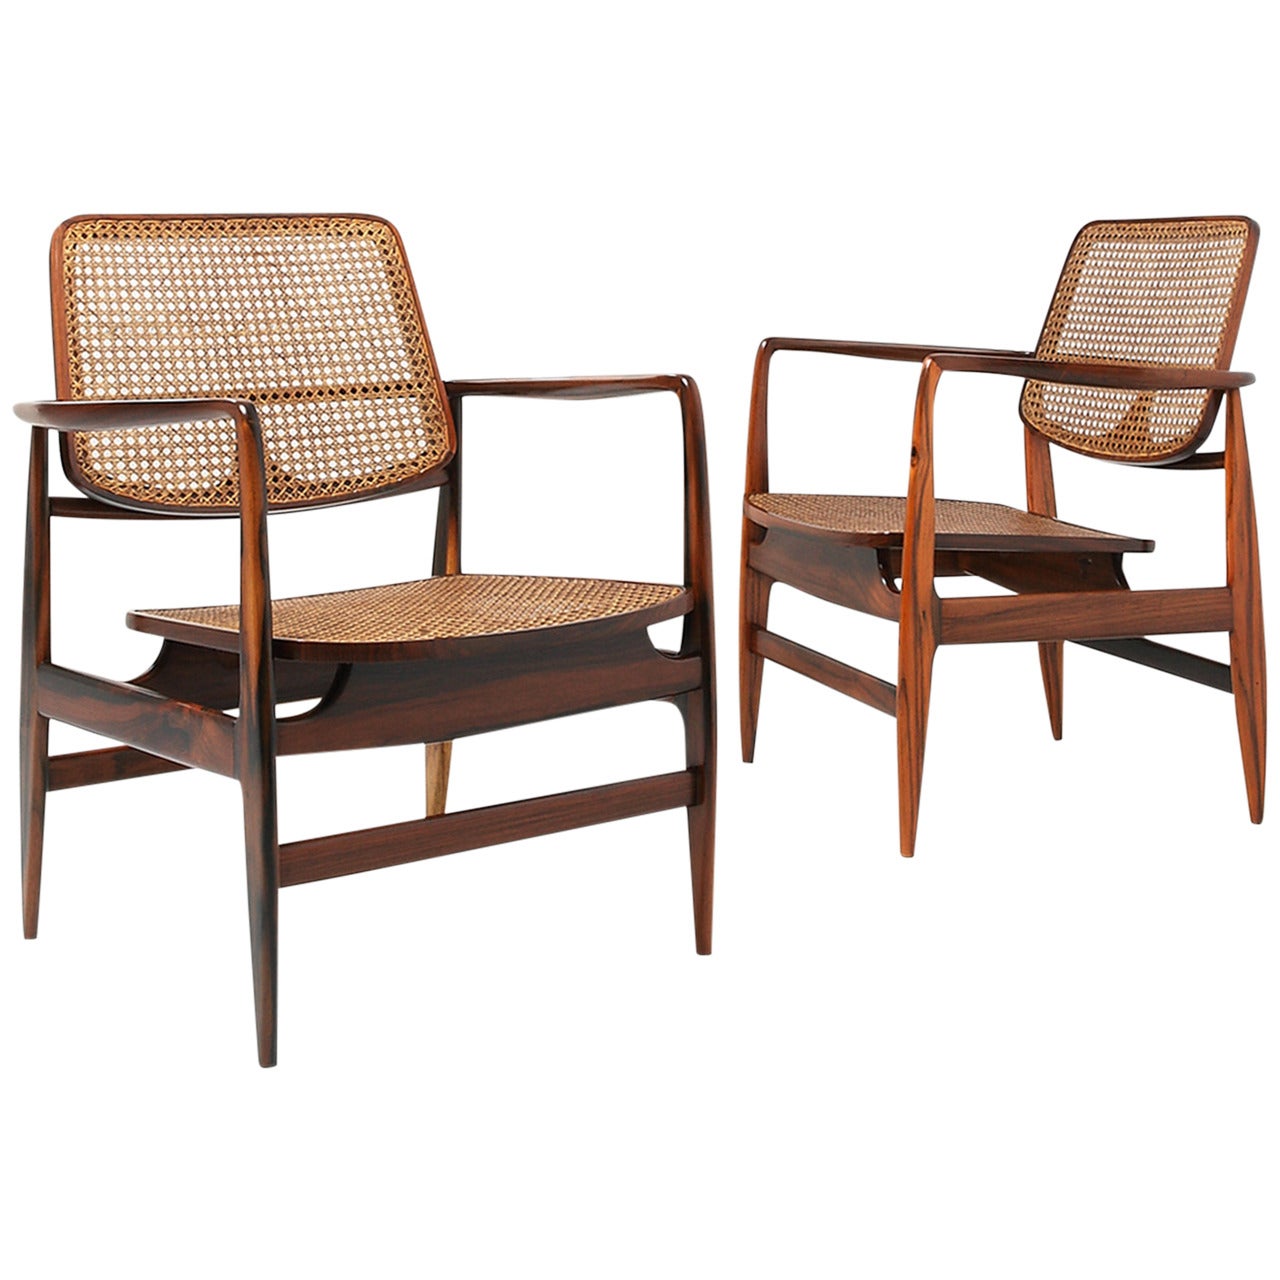 Pair of "Oscar" Armchairs by Sergio Rodrigues, 1956